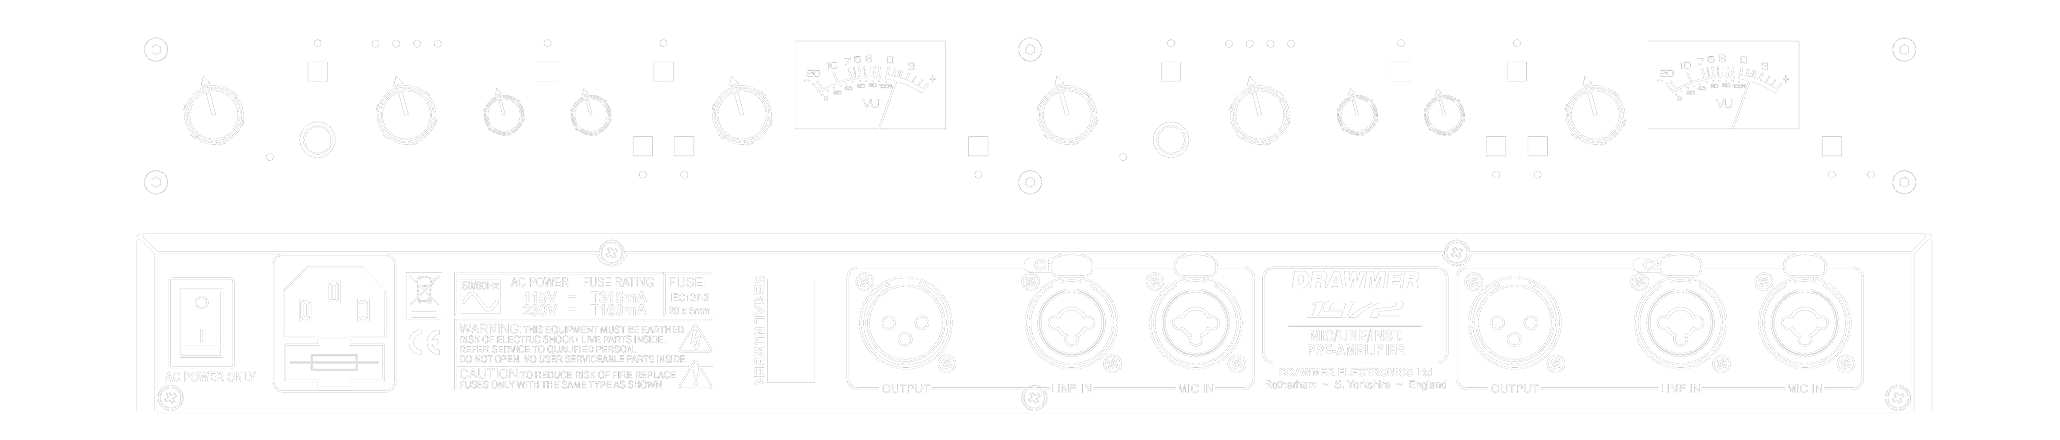 A line drawing of the front and rear panels of the 1972 showing controls and connectors